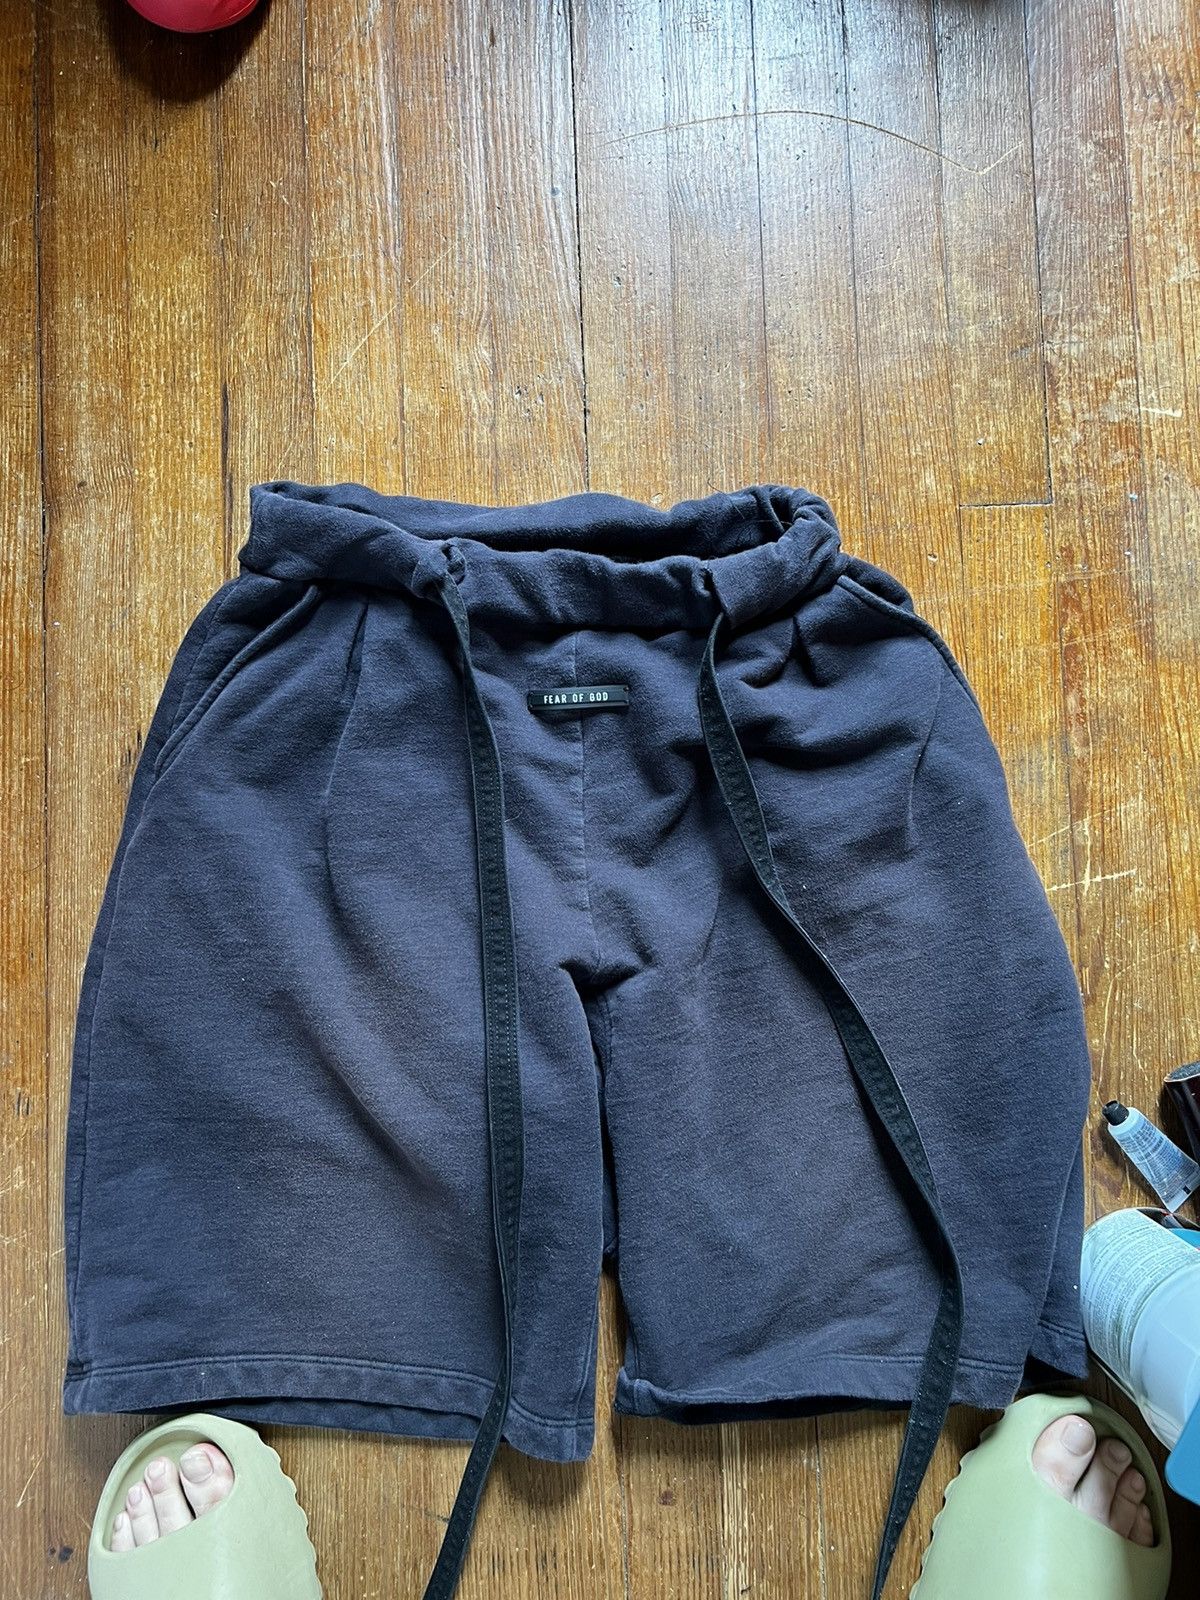 Fear of God Sixth Collection 6th Shorts | Grailed